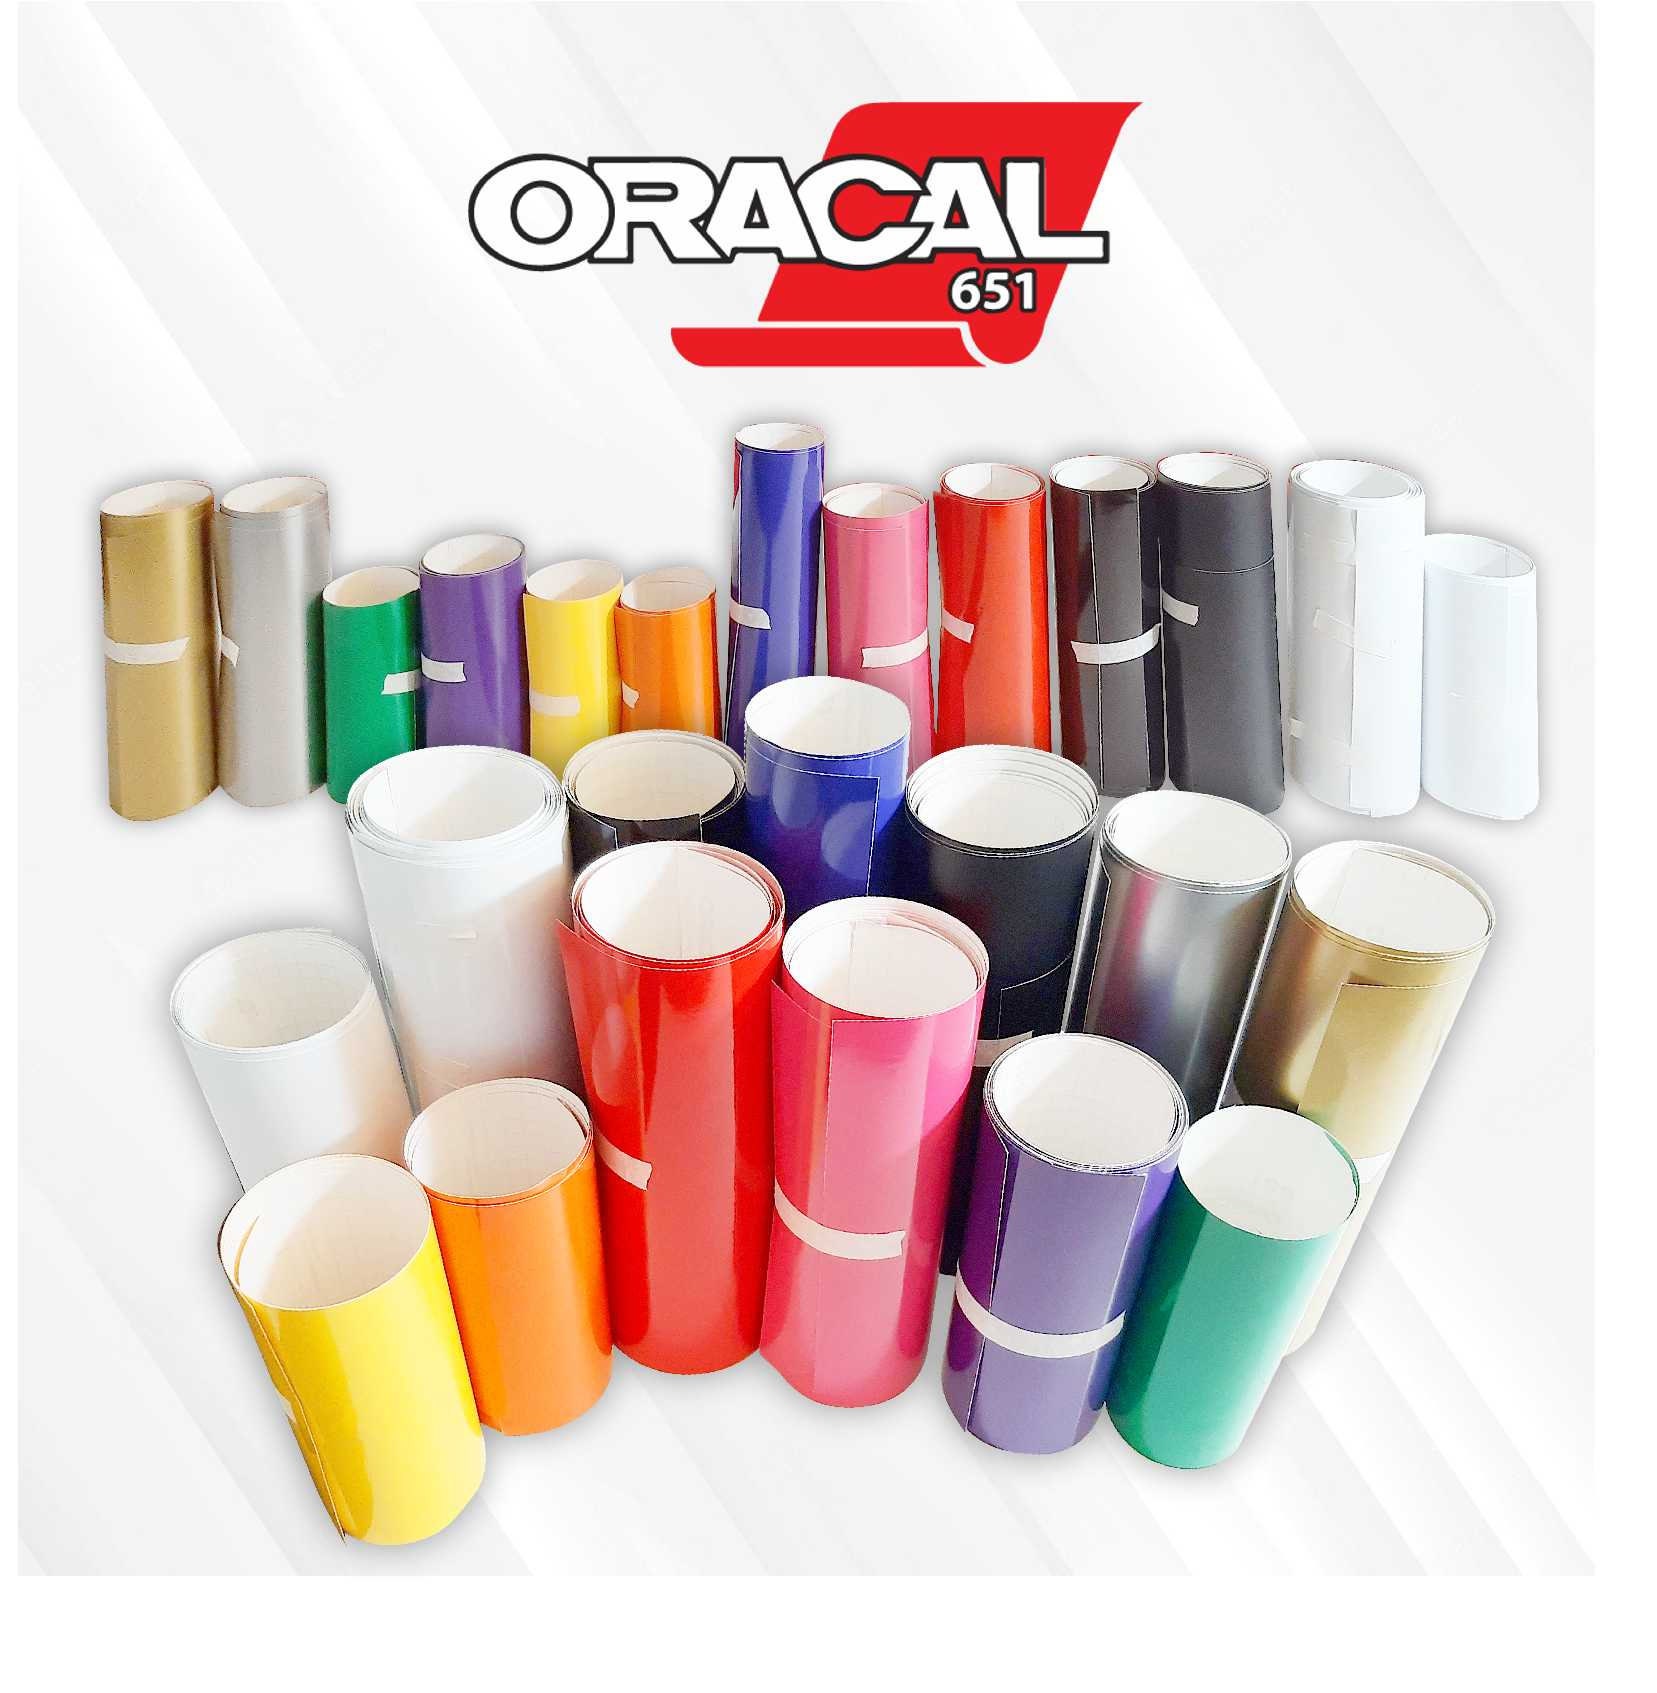 Oracal 651 Adhesive Vinyl in the 12 Inch x 5 Yard Roll Size